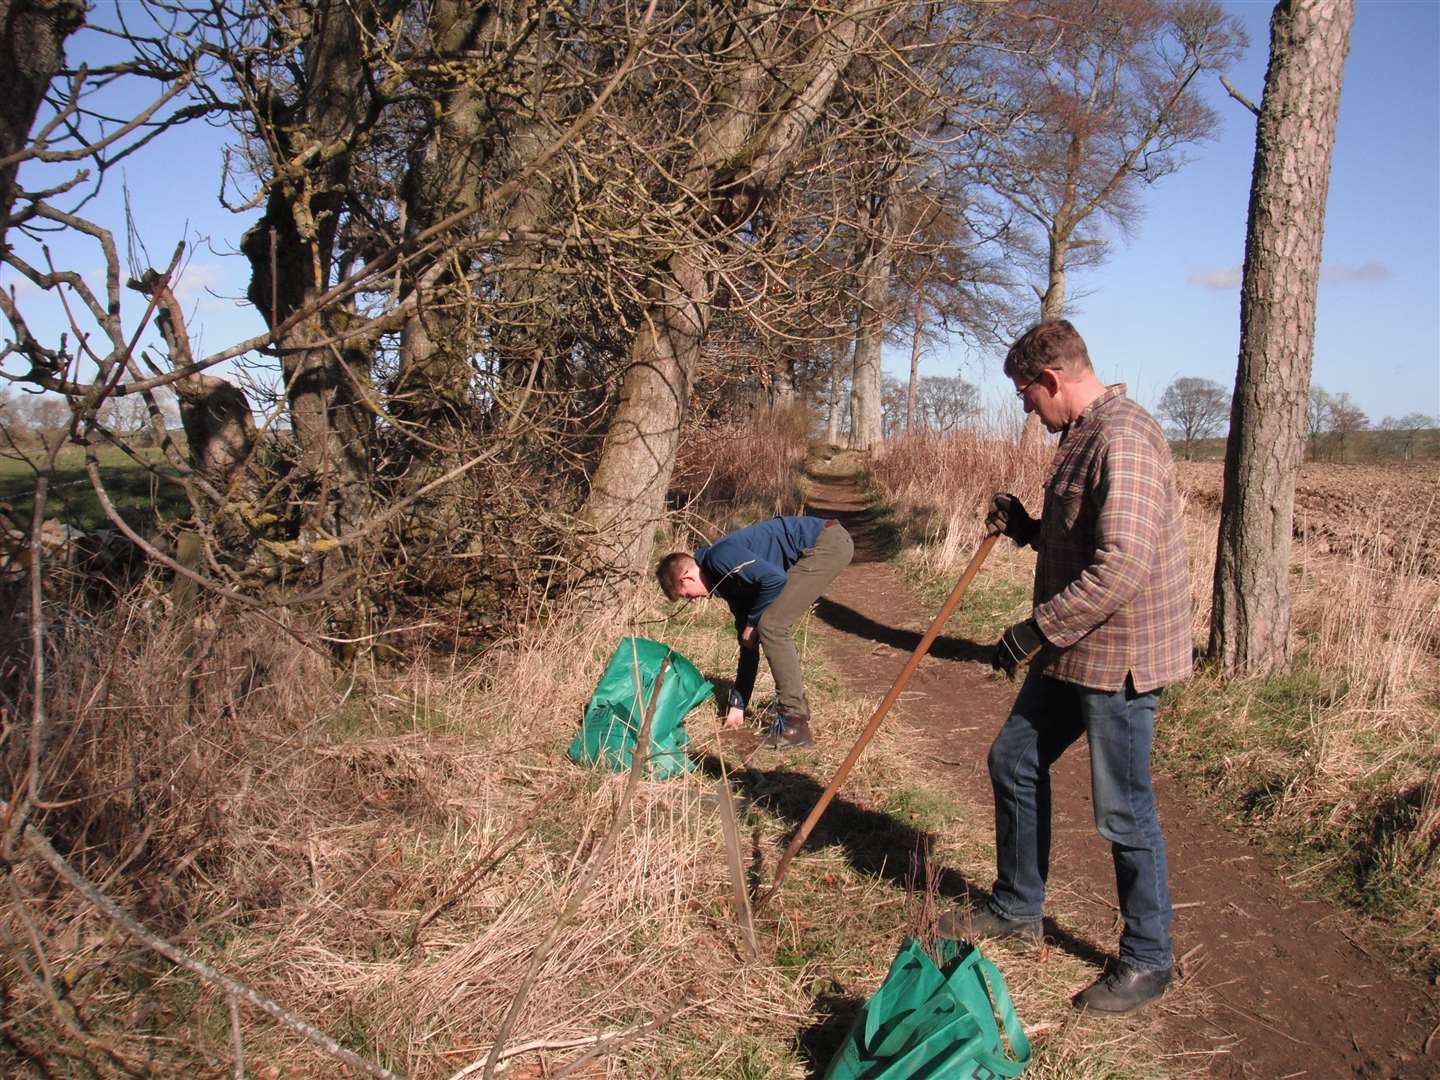 Around 400 new trees were planted by Udny Climate Action.